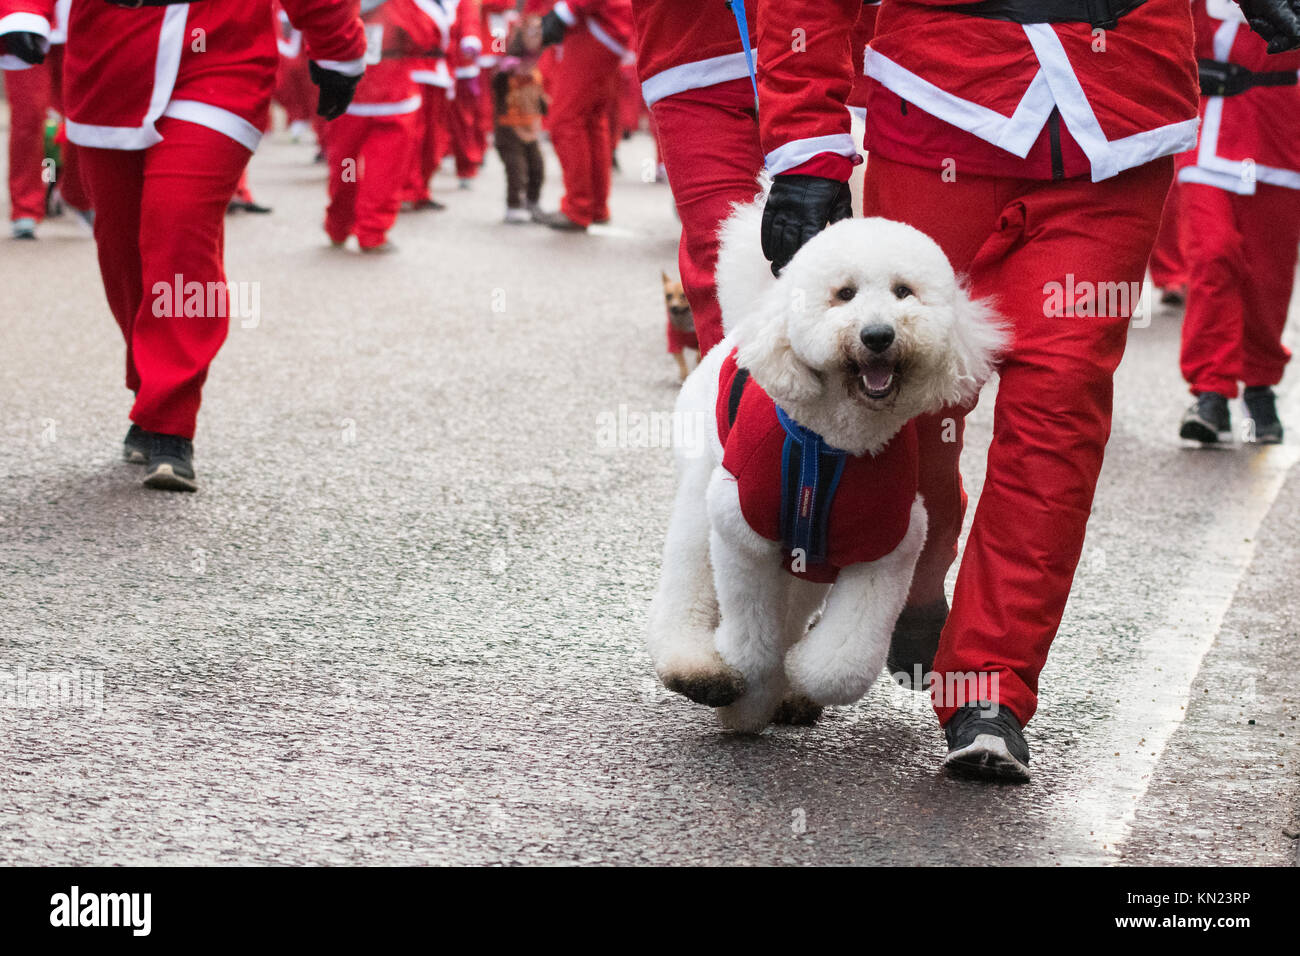 Glasgow, Scotland, UK - 10 December 2017: UK weather - thousands of santas brave temperatures well below zero on a freezing cold day in Glasgow raising money for charity at the Glasgow Santa Dash Credit: Kay Roxby/Alamy Live News Stock Photo